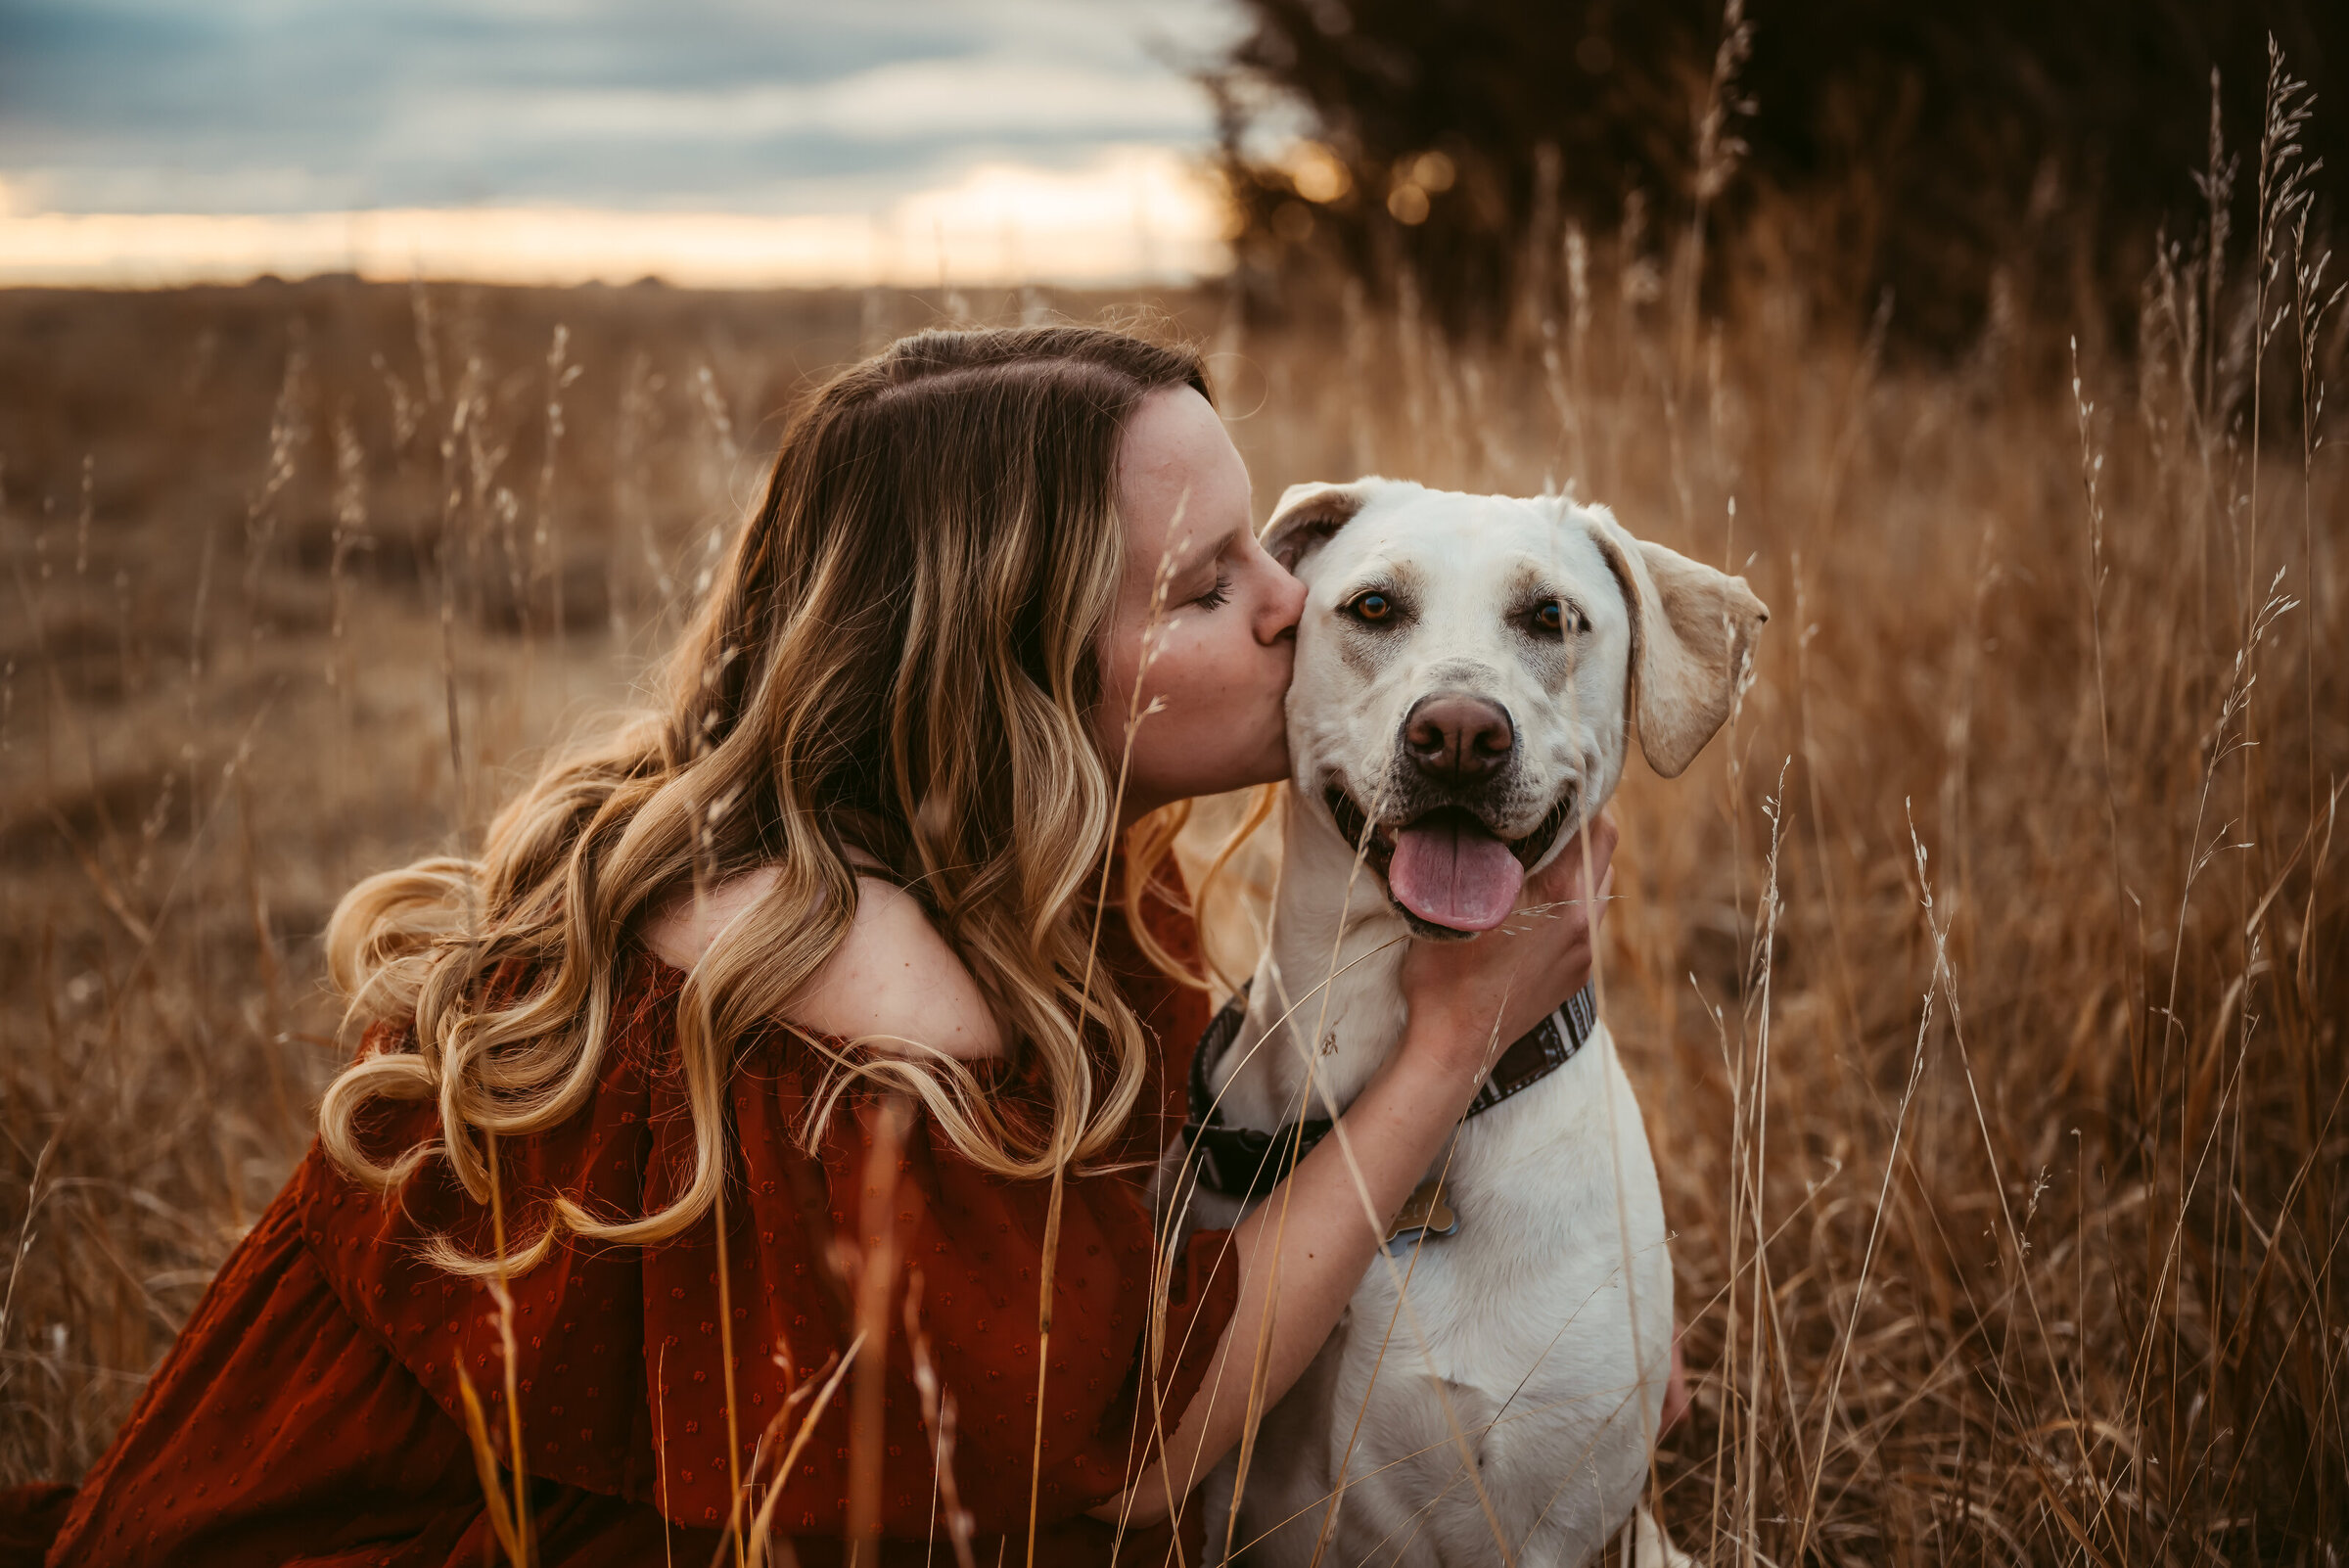 Woman kisses smiling dog on the cheek while dog pants and smiles at the camera